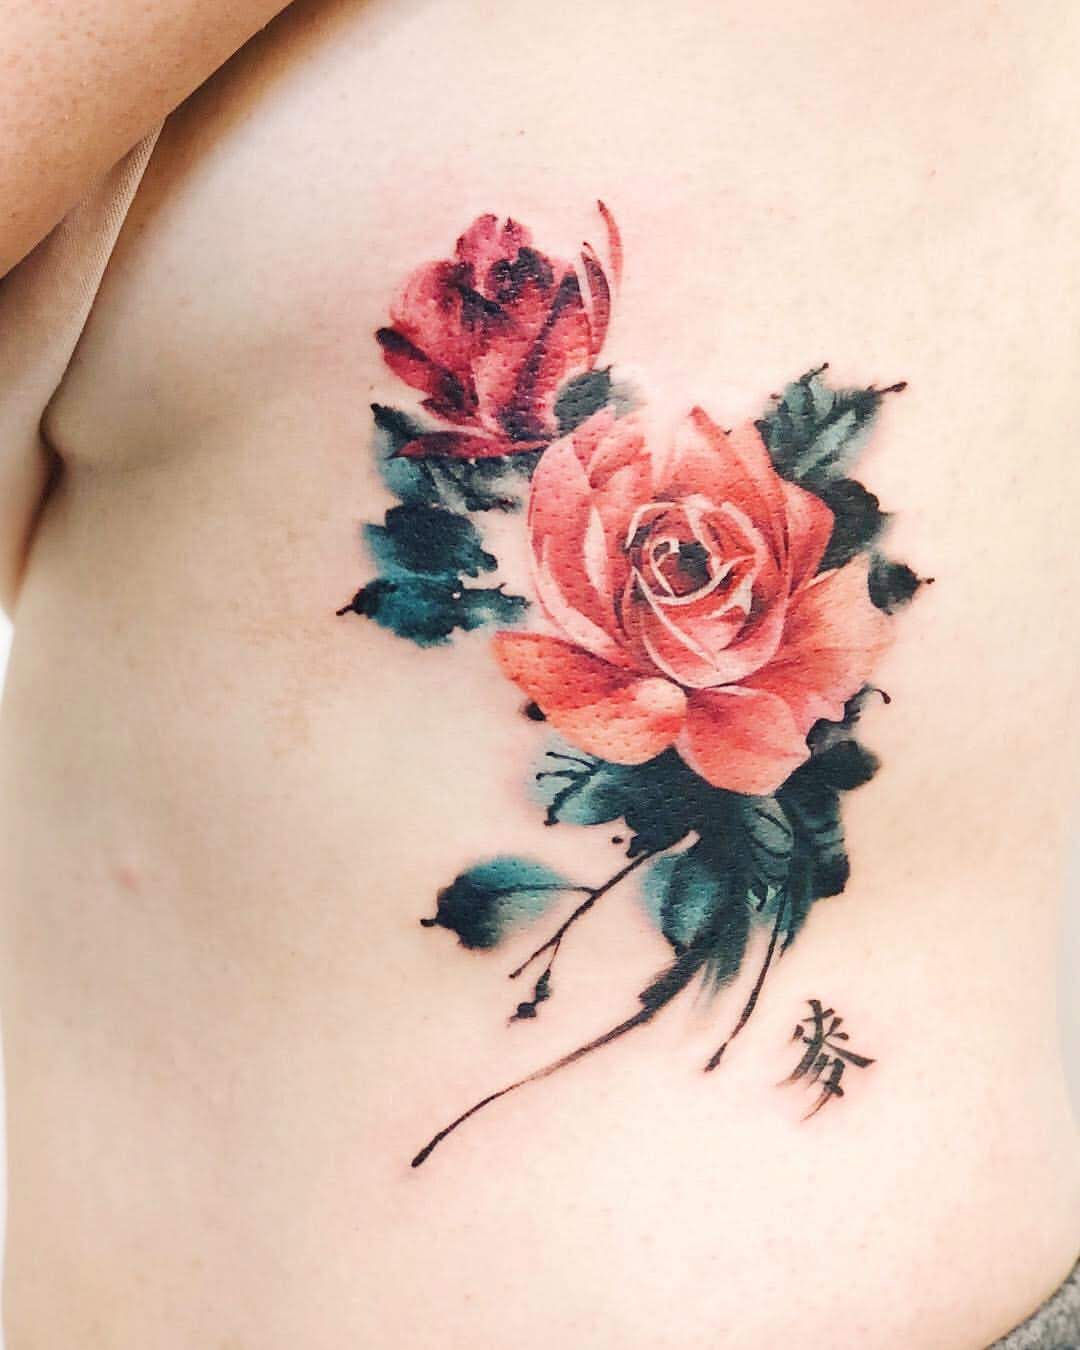 Tattoo Healing Process Before and Afters  POPSUGAR Beauty